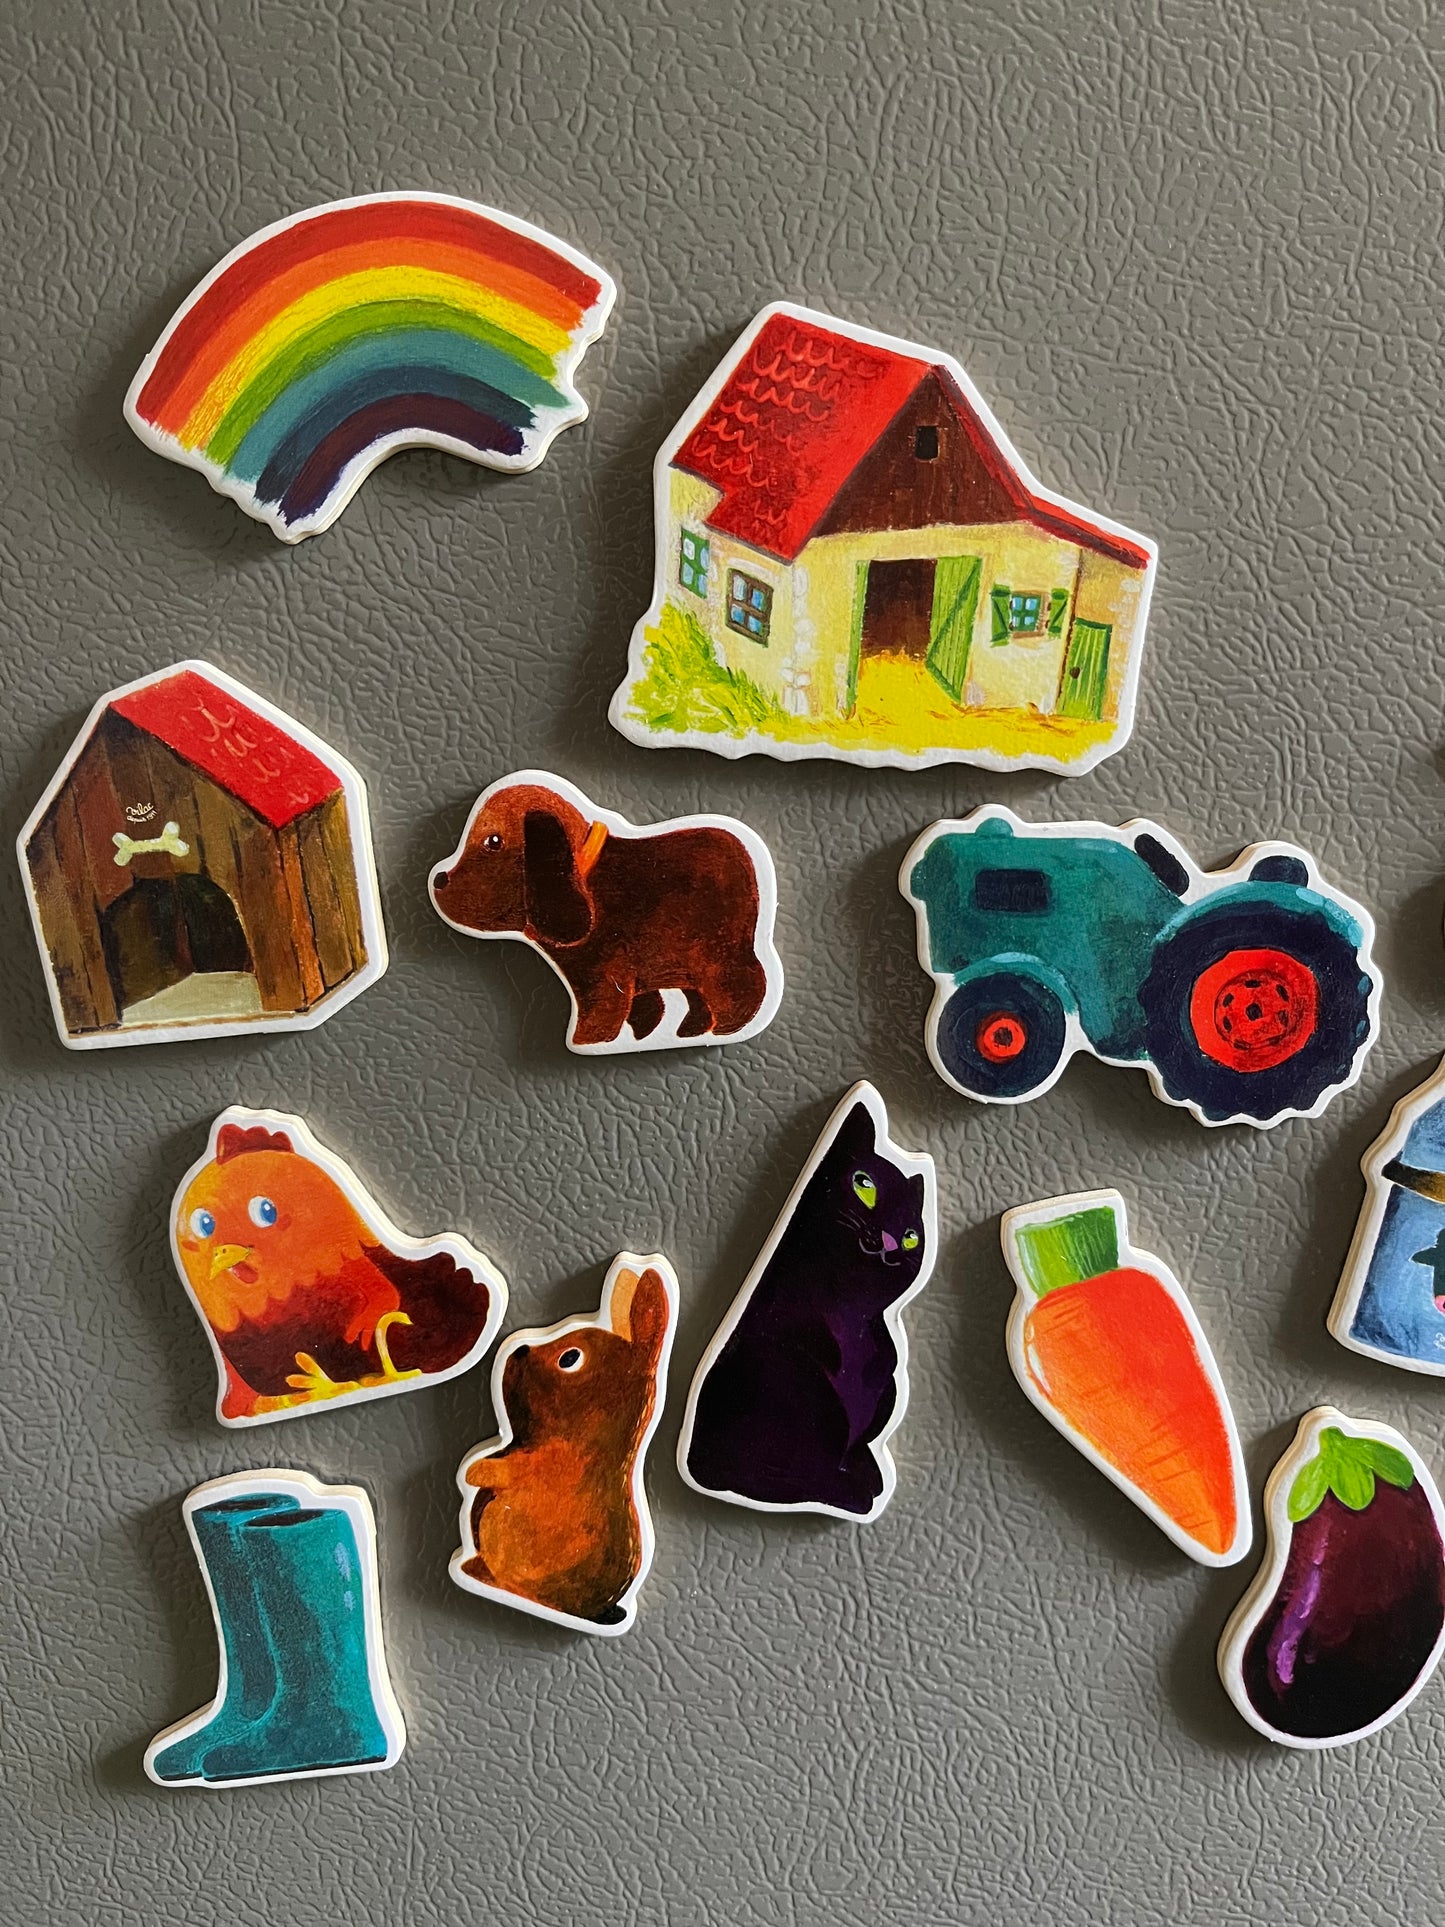 Acivity Set - Wooden MAGNETS, "On the Farm", 20 magnets!